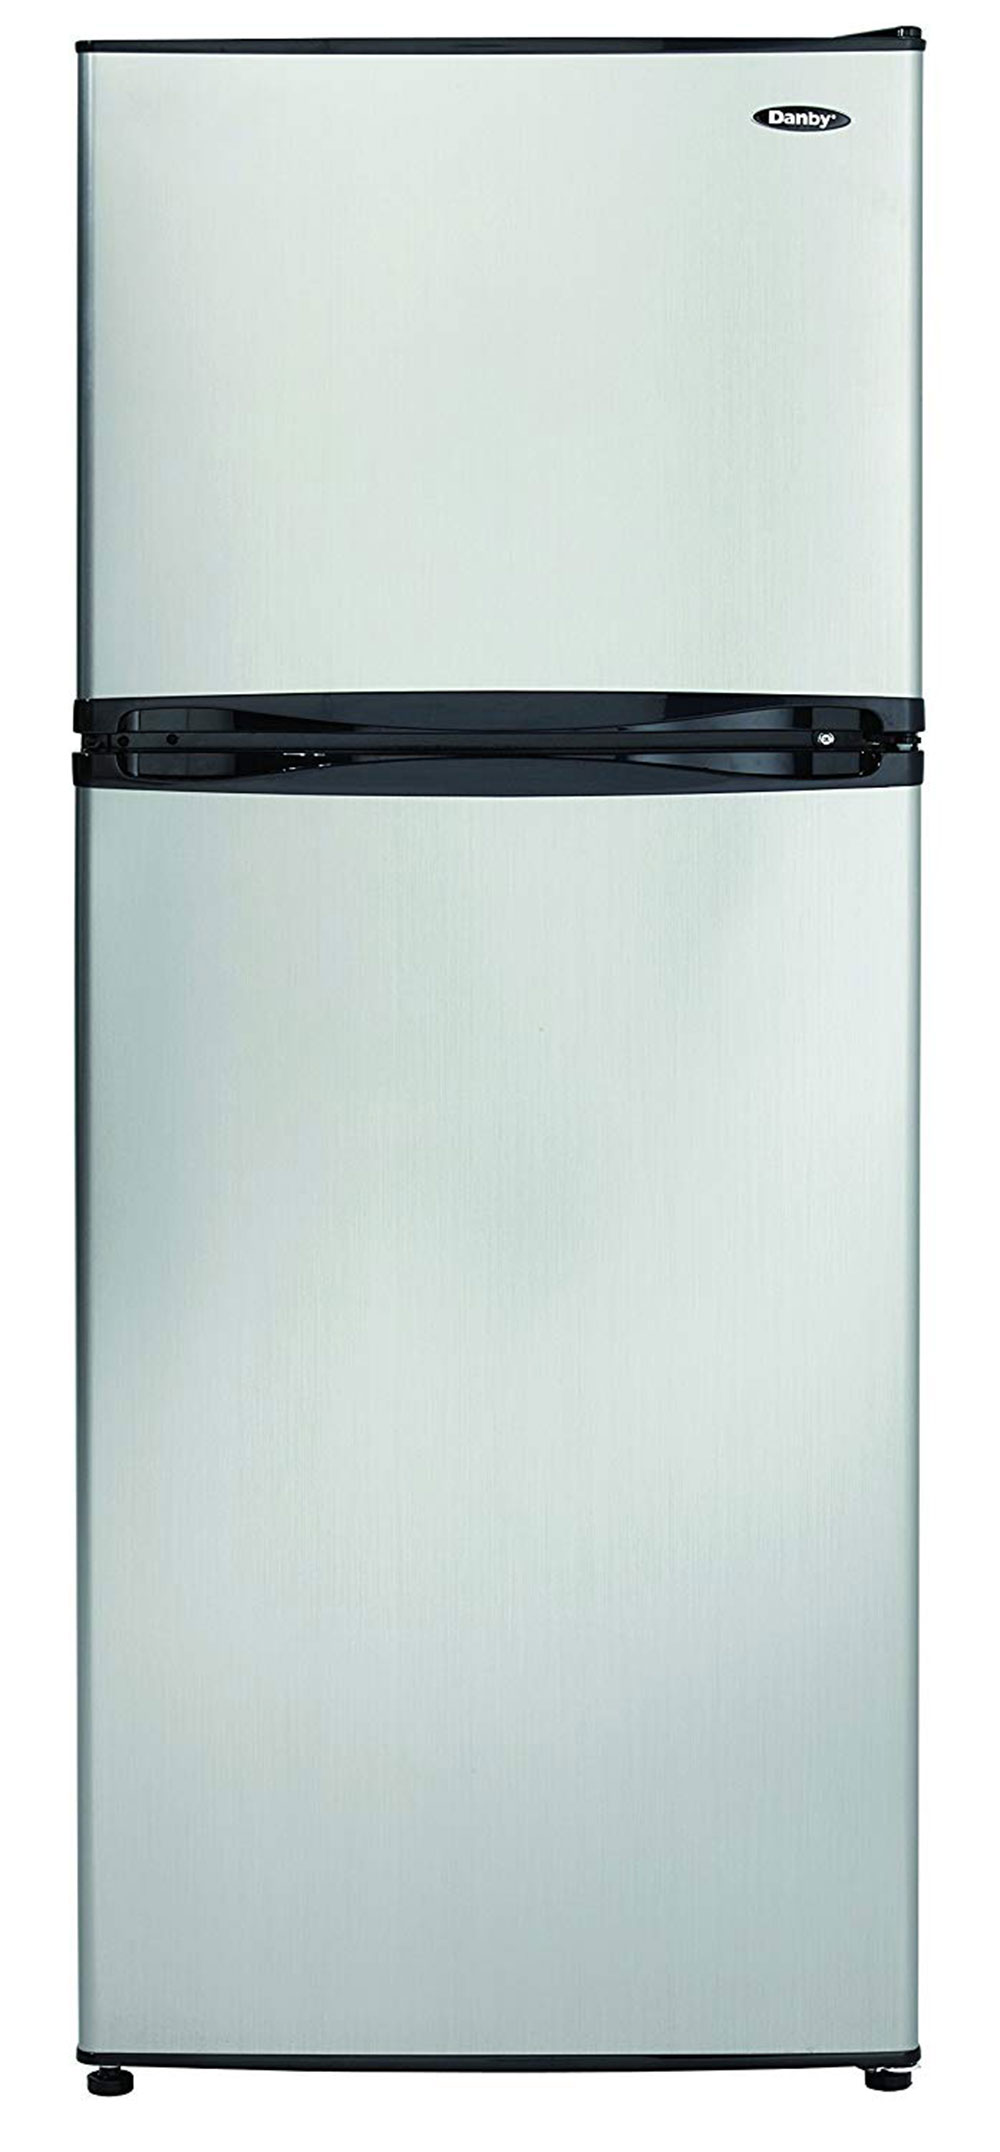 Danby-DFF100C1BSLDB-Refrigerator What’s the best counter depth refrigerator you can get online?